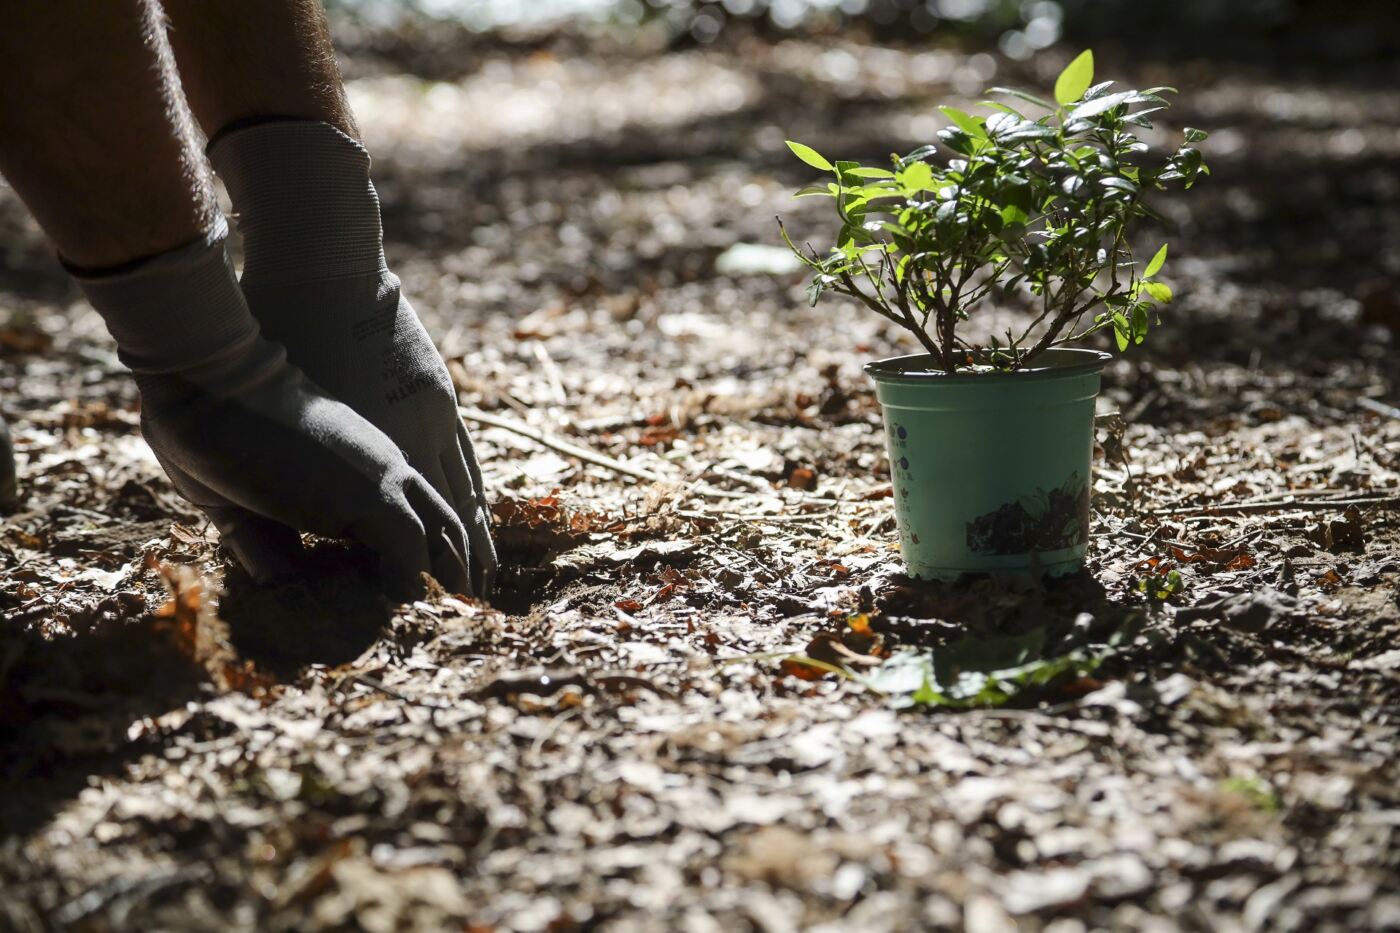 Gloved hands planting small potted tree into ground